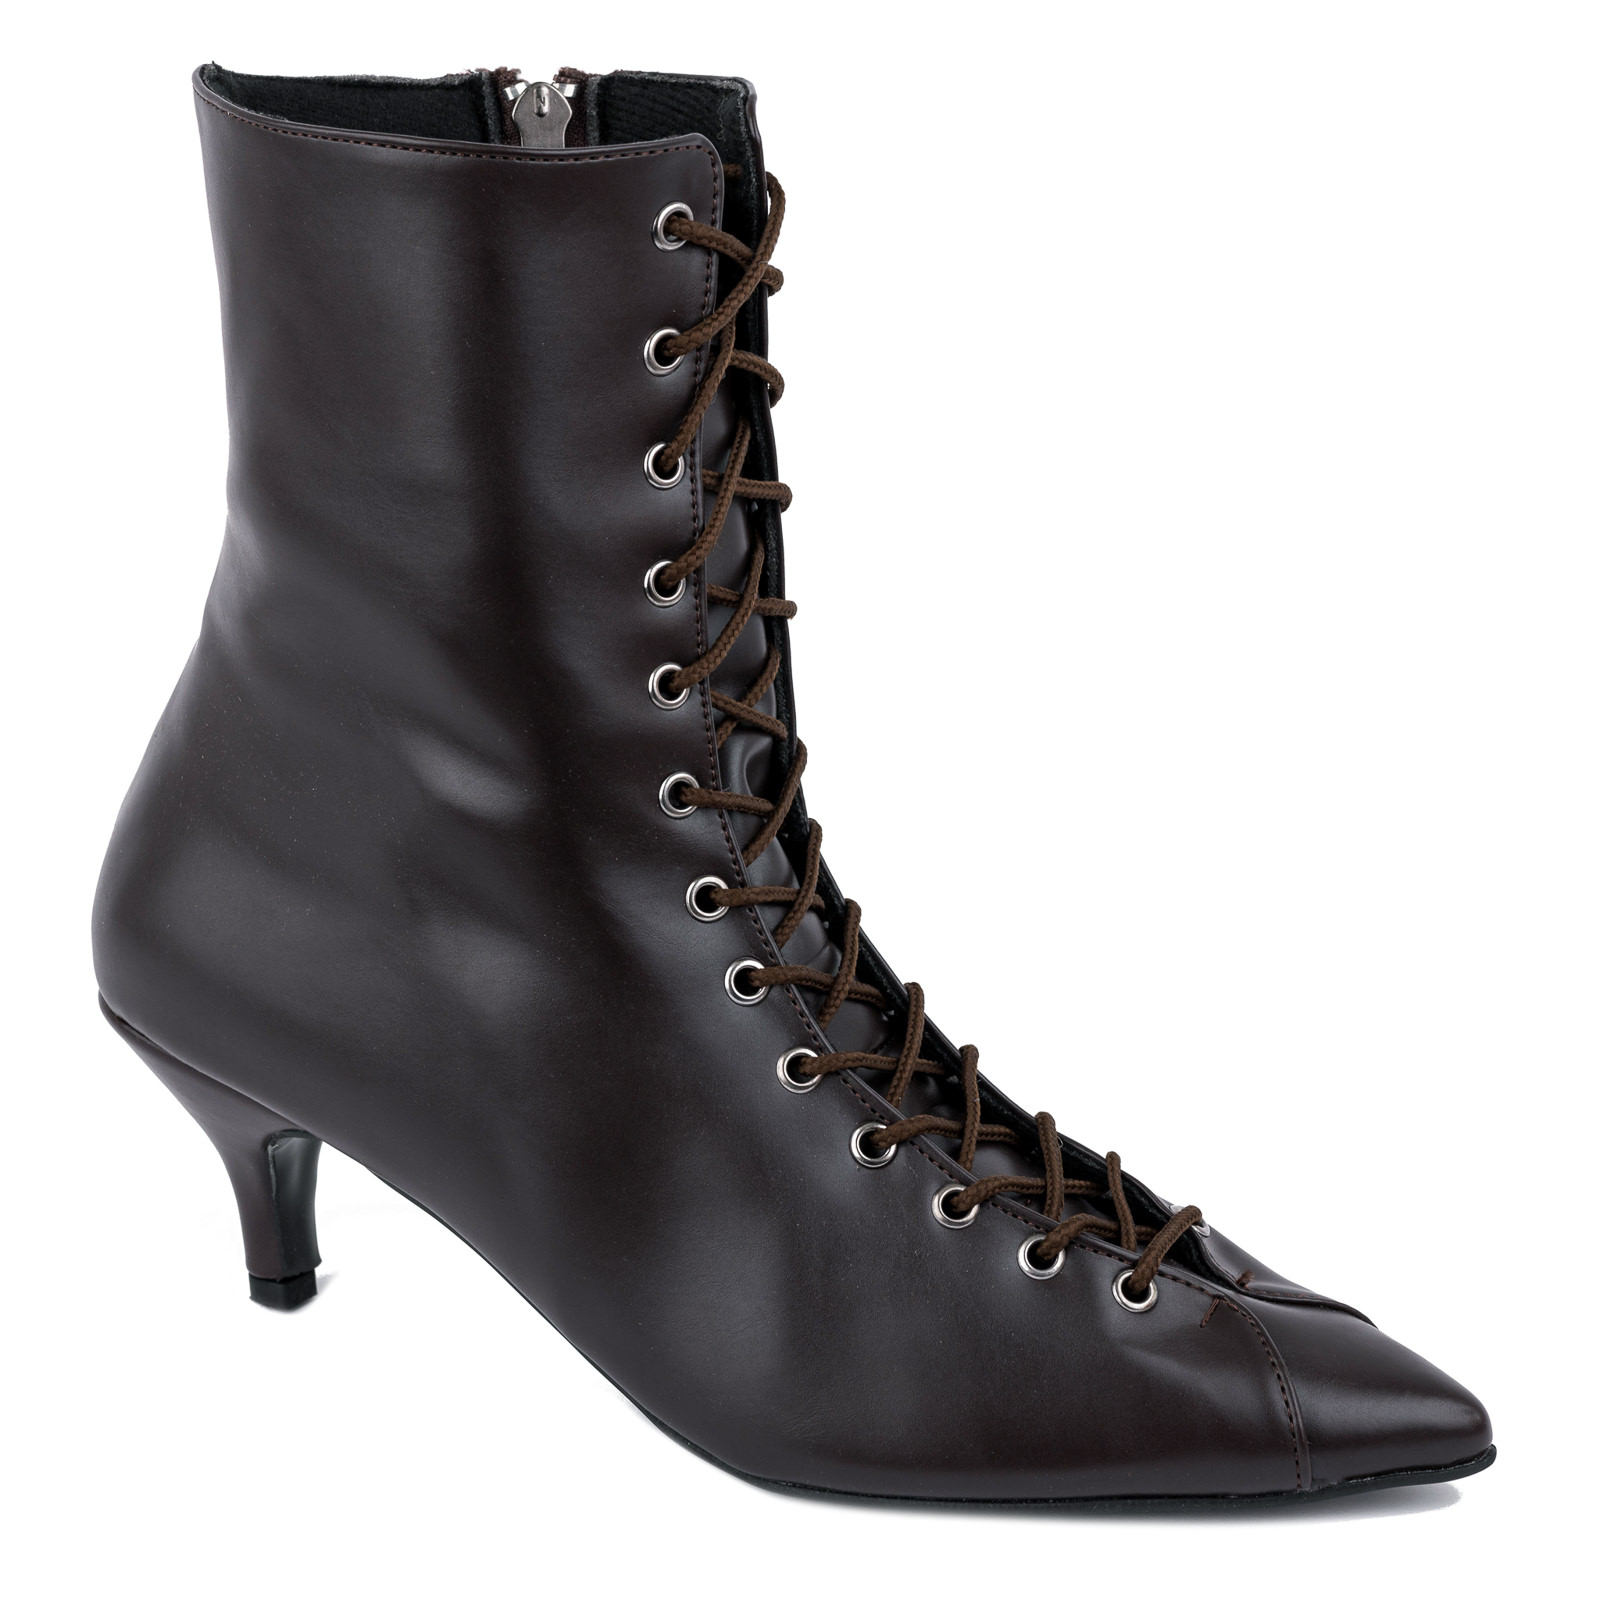 POINTED LACE UP ANKLE BOOTS WITH THIN HEEL - BROWN